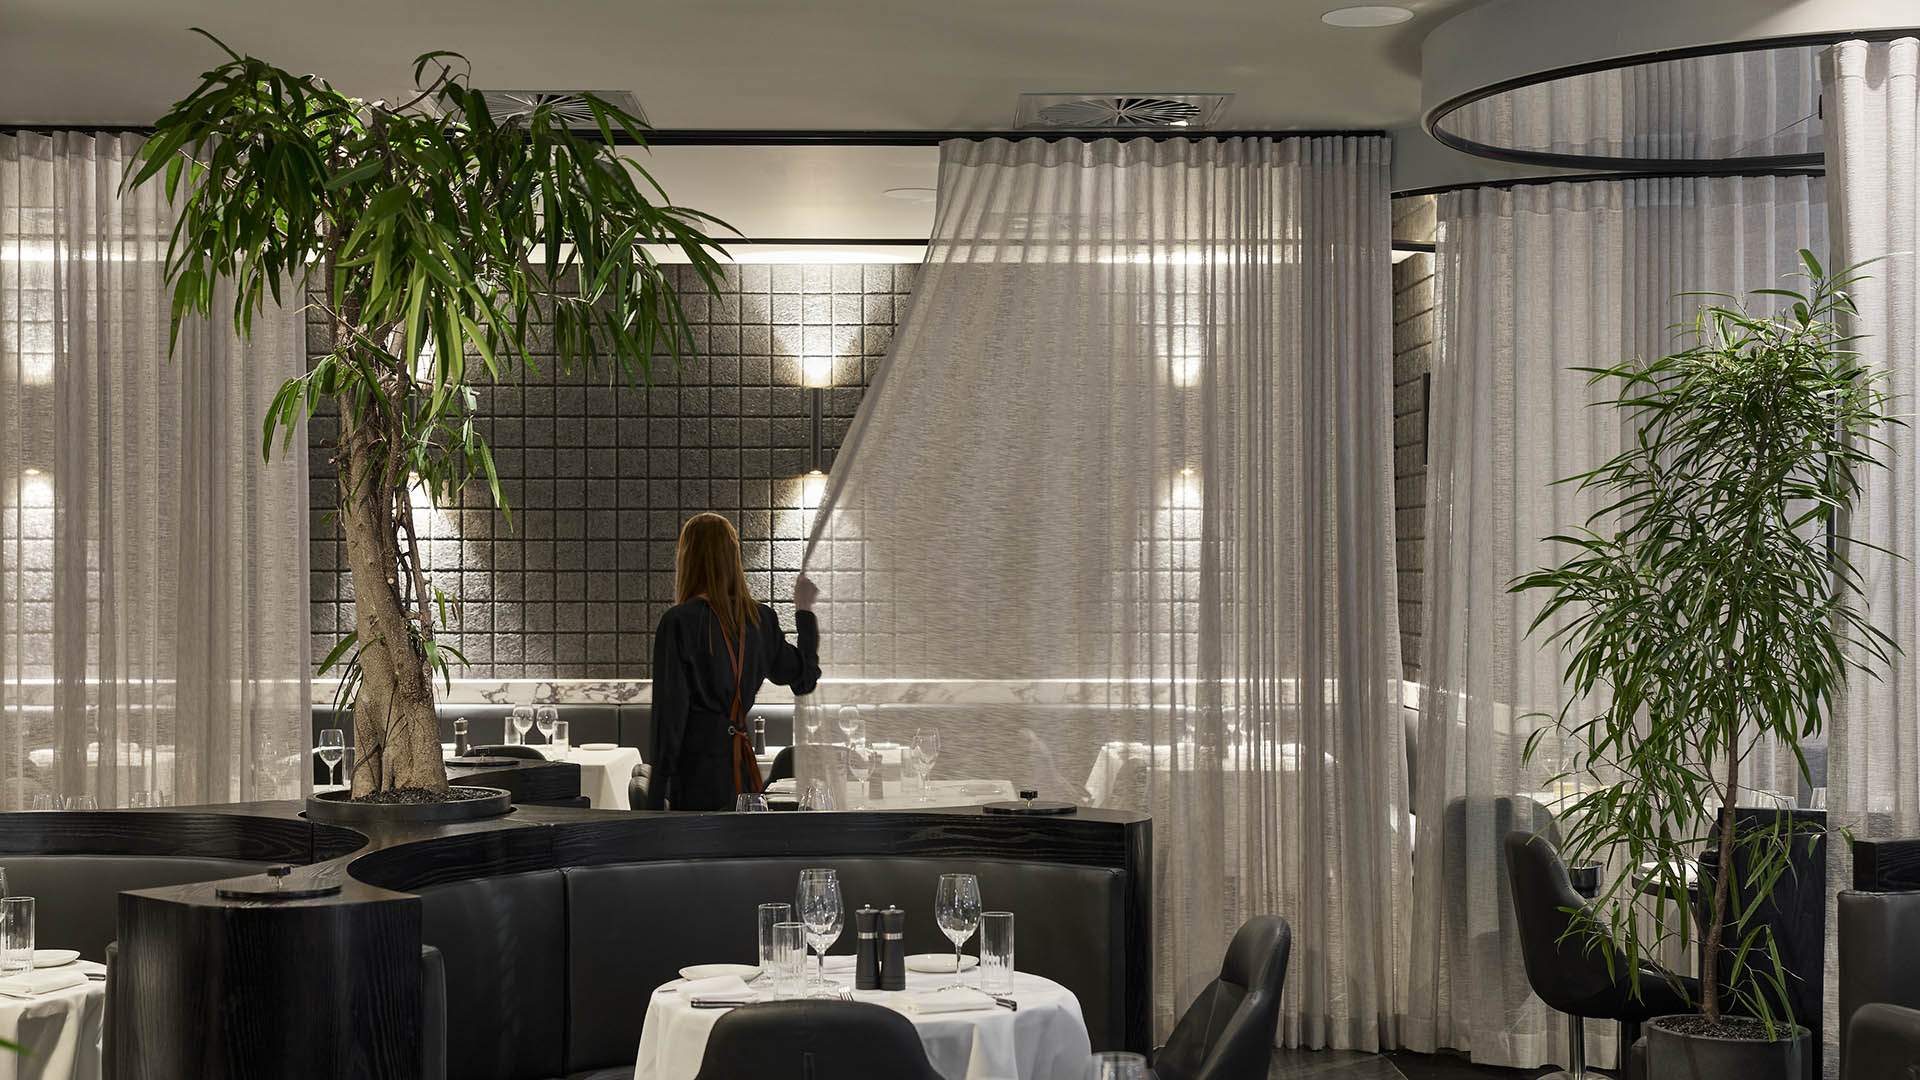 Now Open: Wagyu Tasting Boards and Booths with Floor-to-Ceiling Curtains Await at Fatcow on James Street